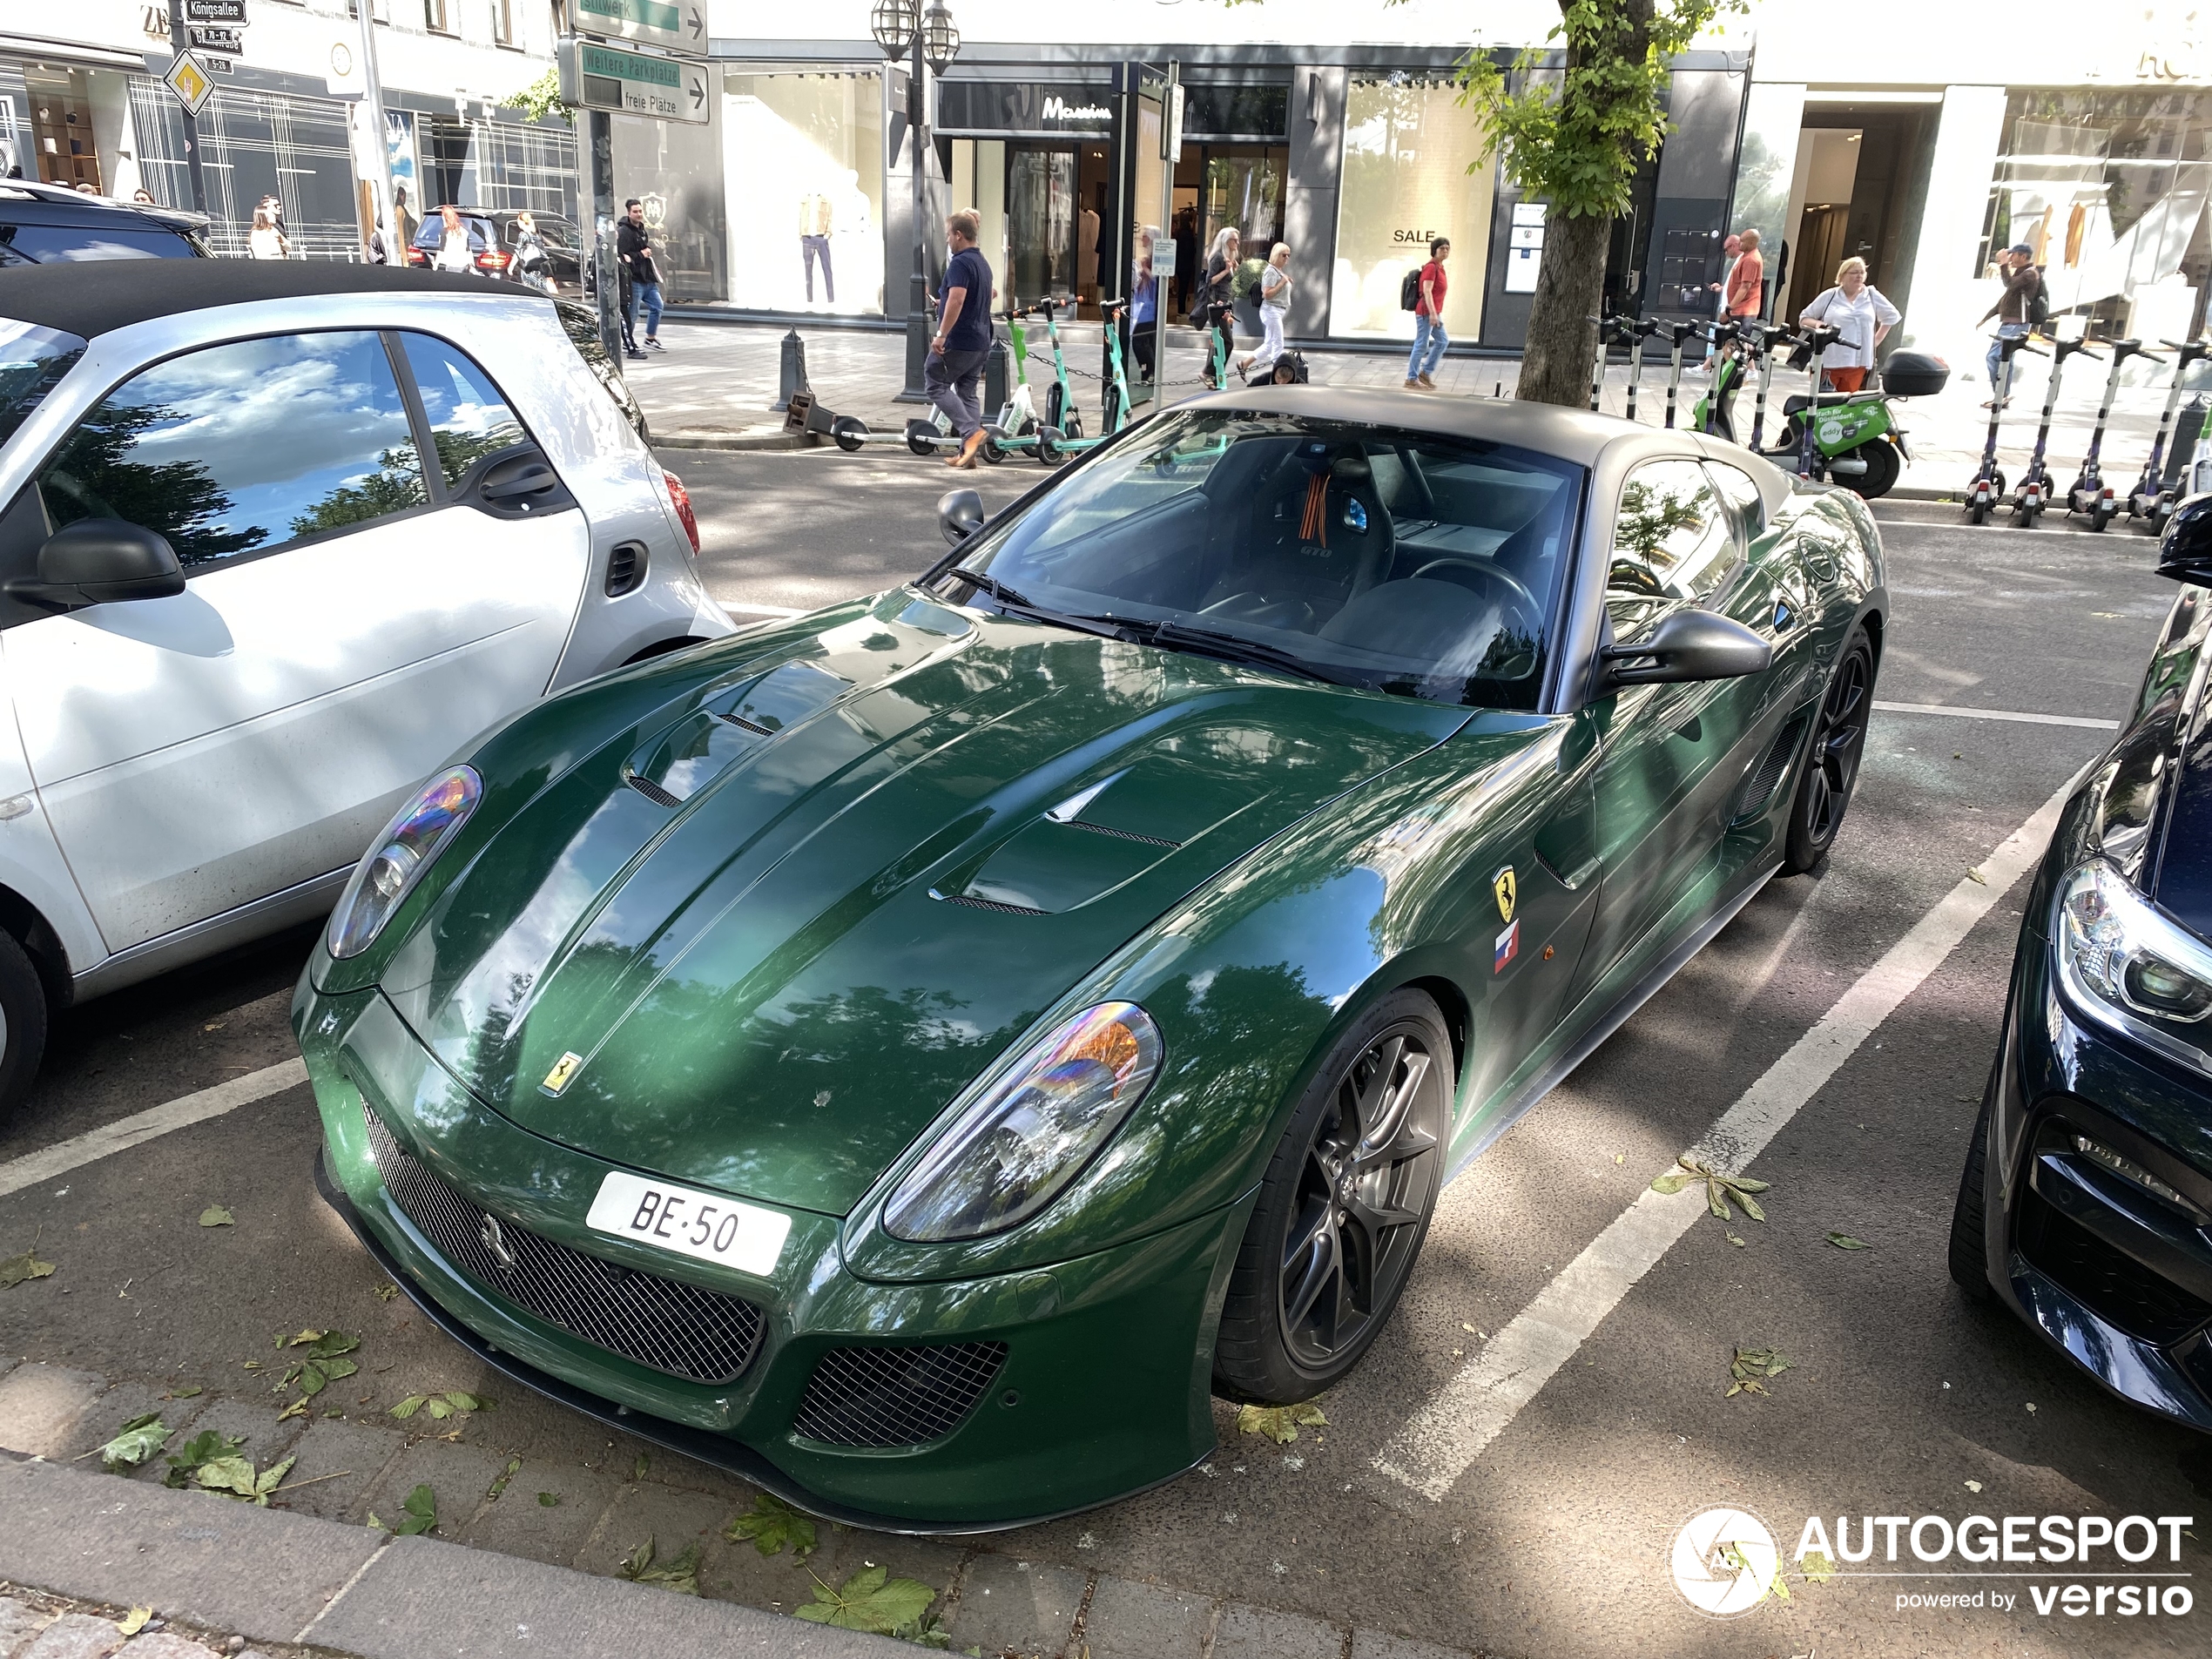 This green GTO reappears